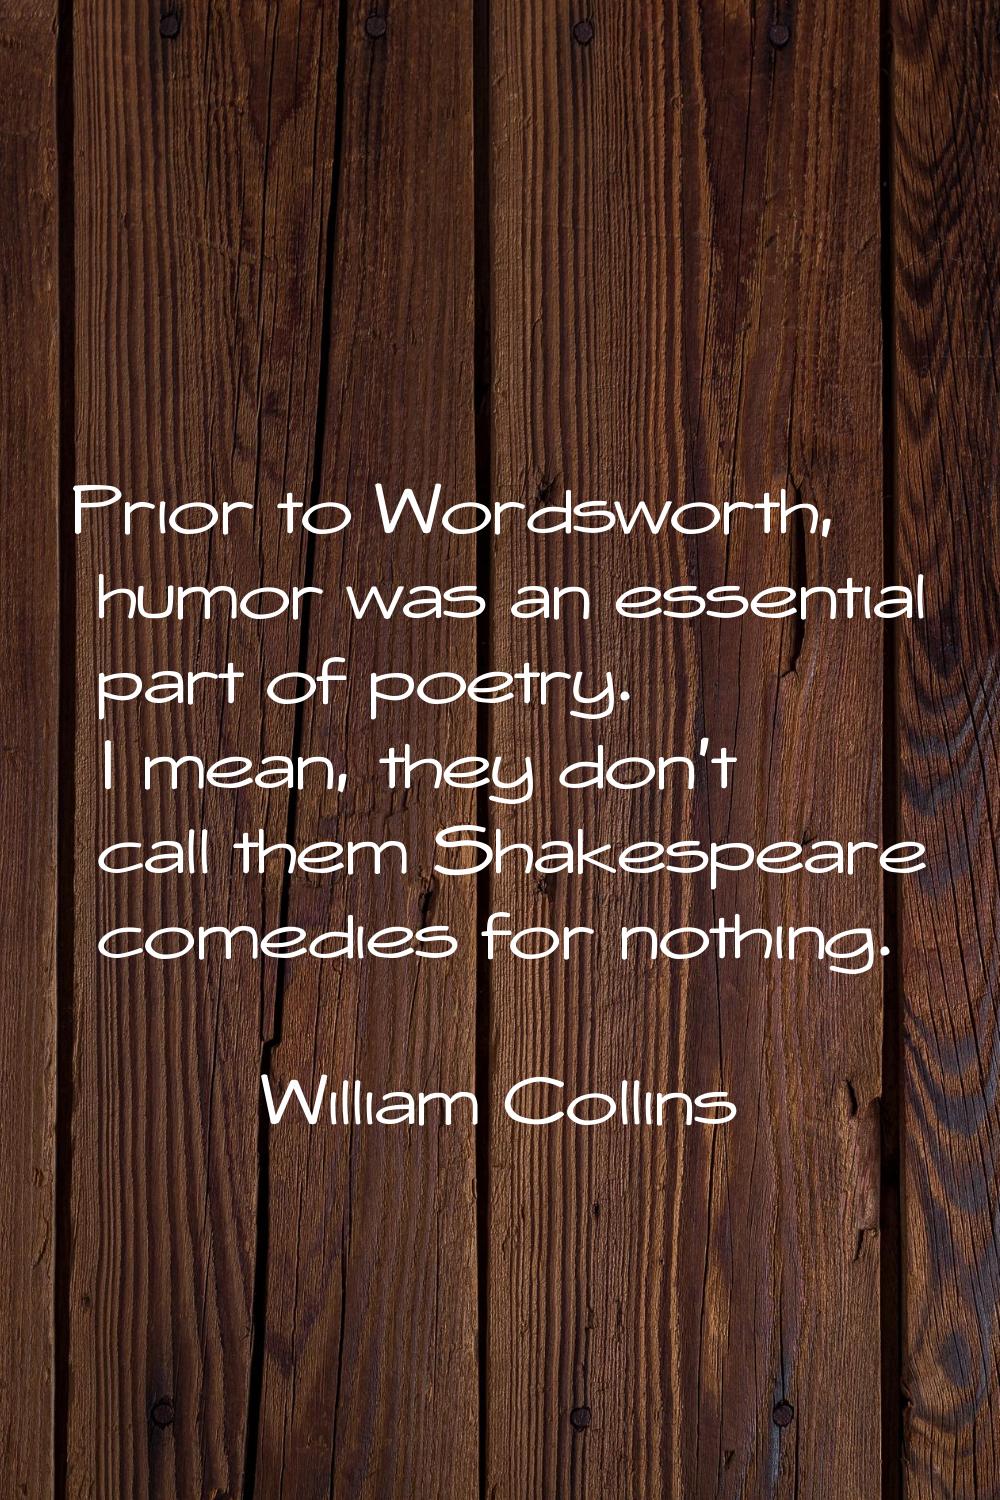 Prior to Wordsworth, humor was an essential part of poetry. I mean, they don't call them Shakespear